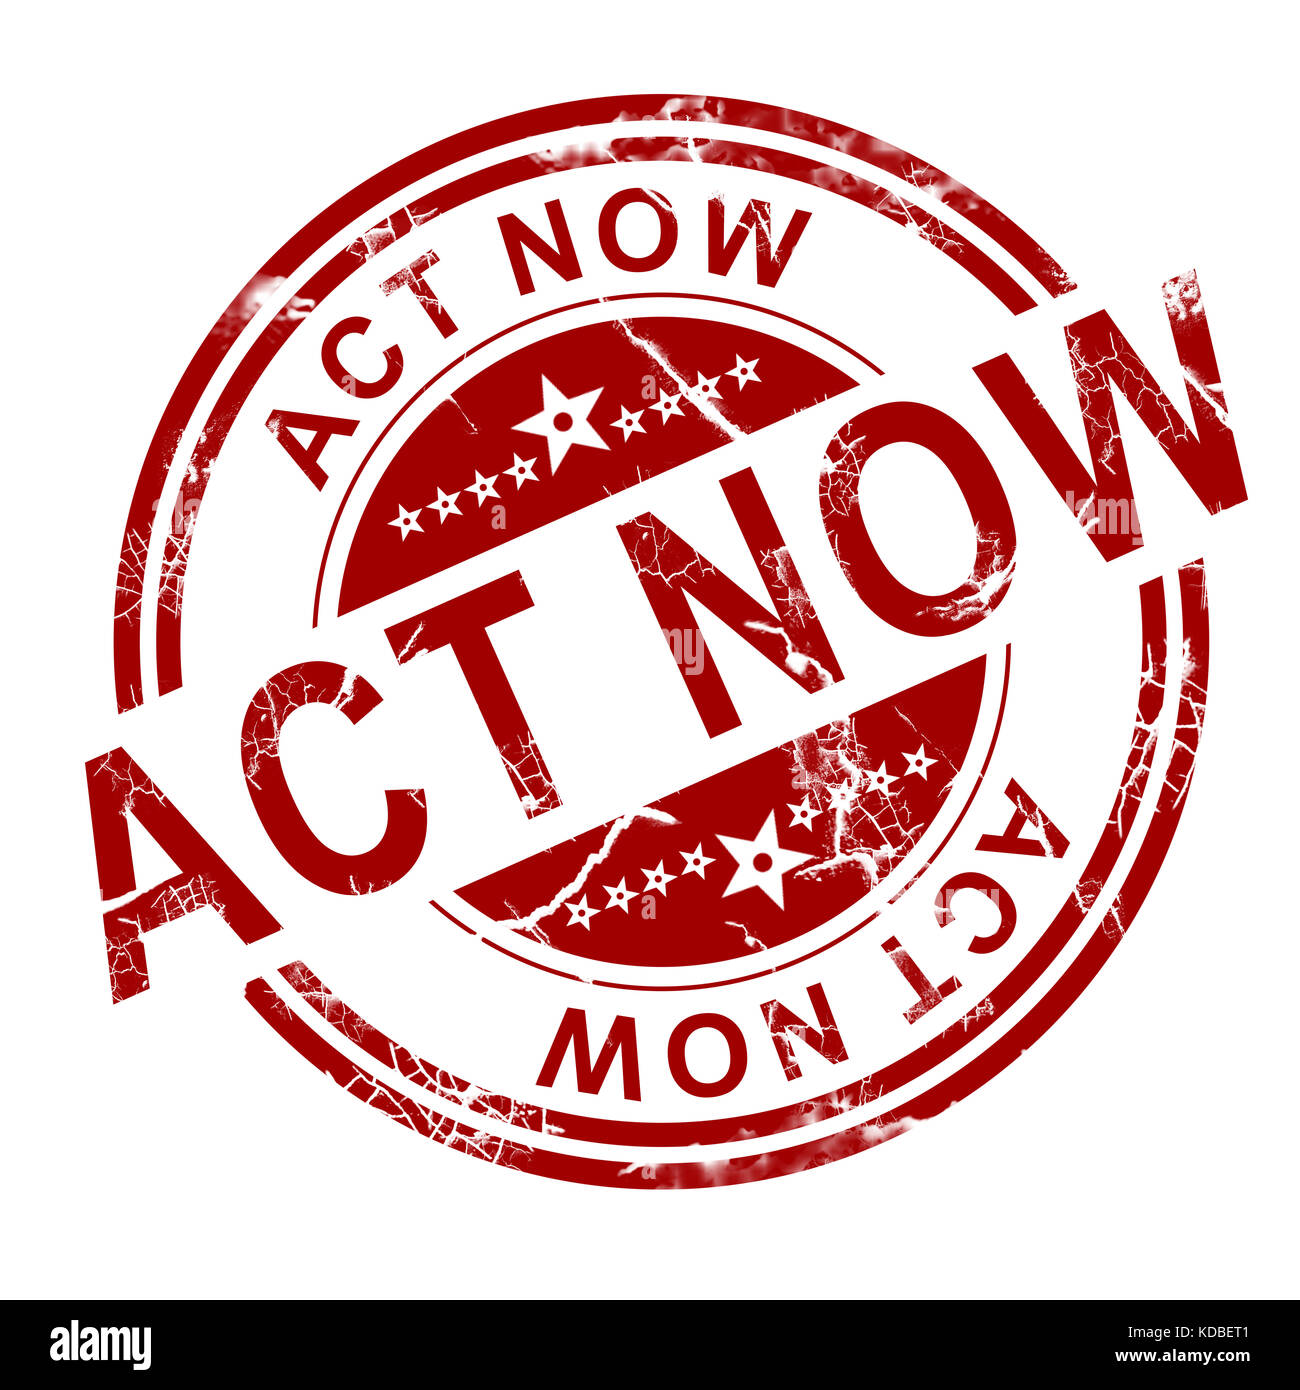 Red act now stamp with white background, 3D rendering Stock Photo